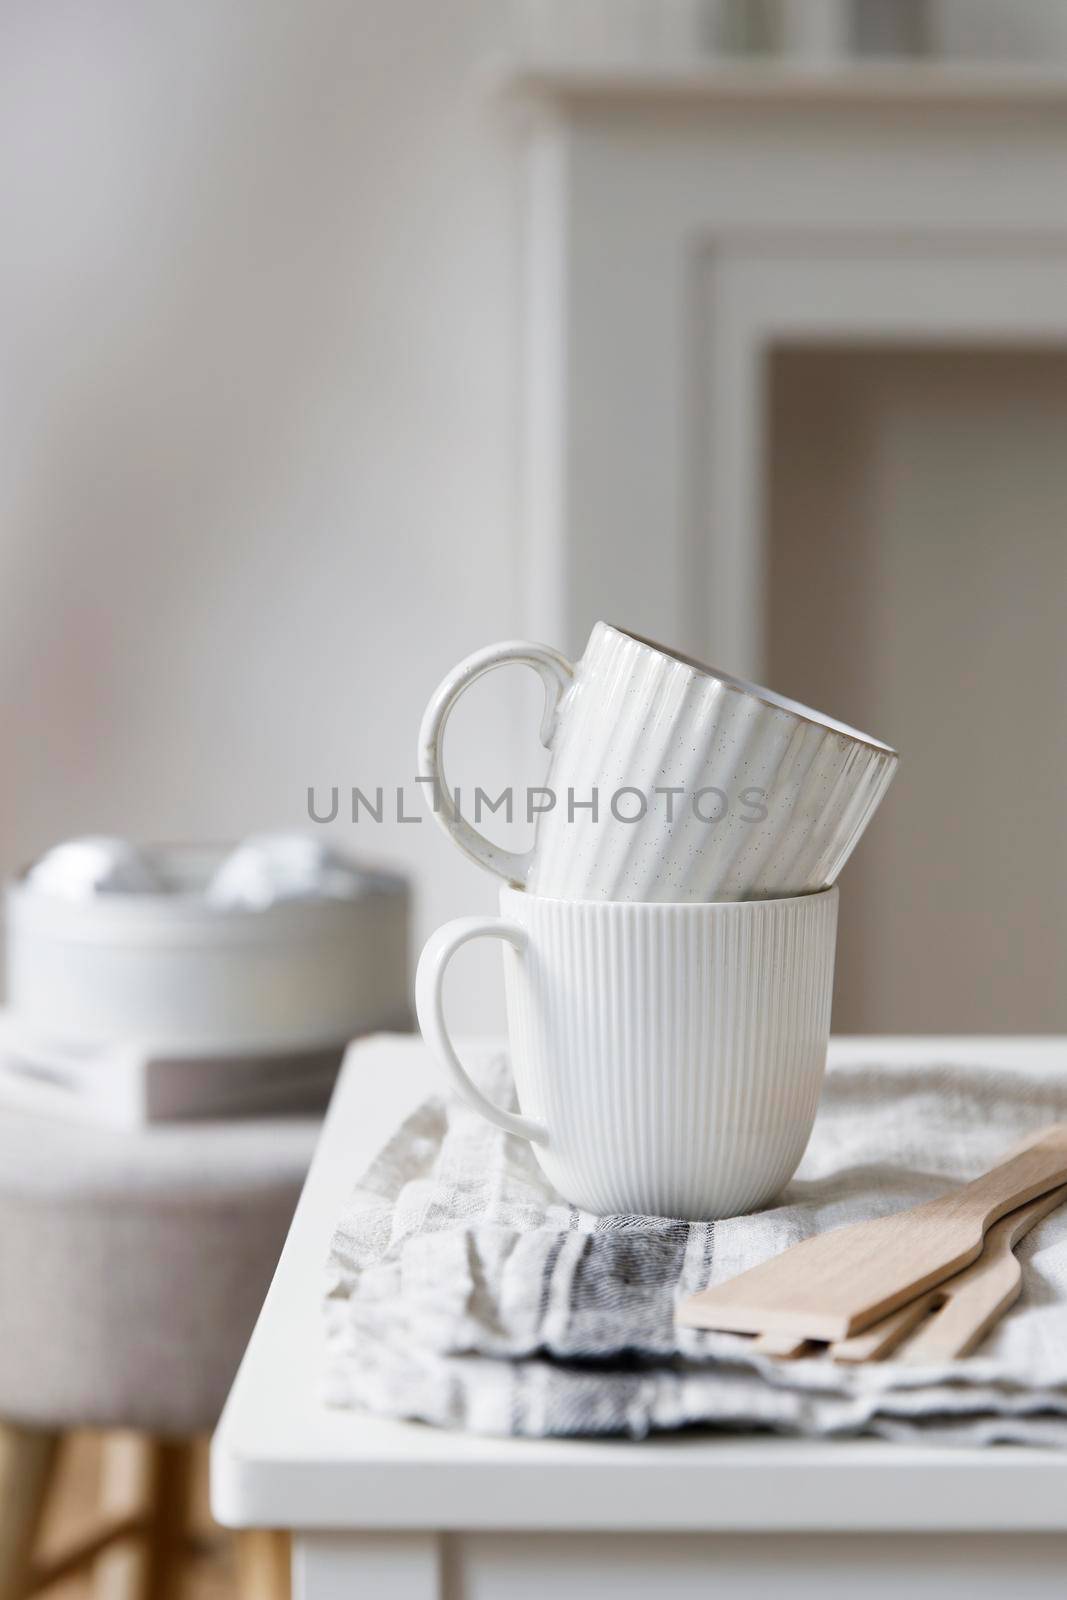 Two white mugs, a kitchen towel, a napkin and wooden frying utensils on the table. Defocus. by elenarostunova